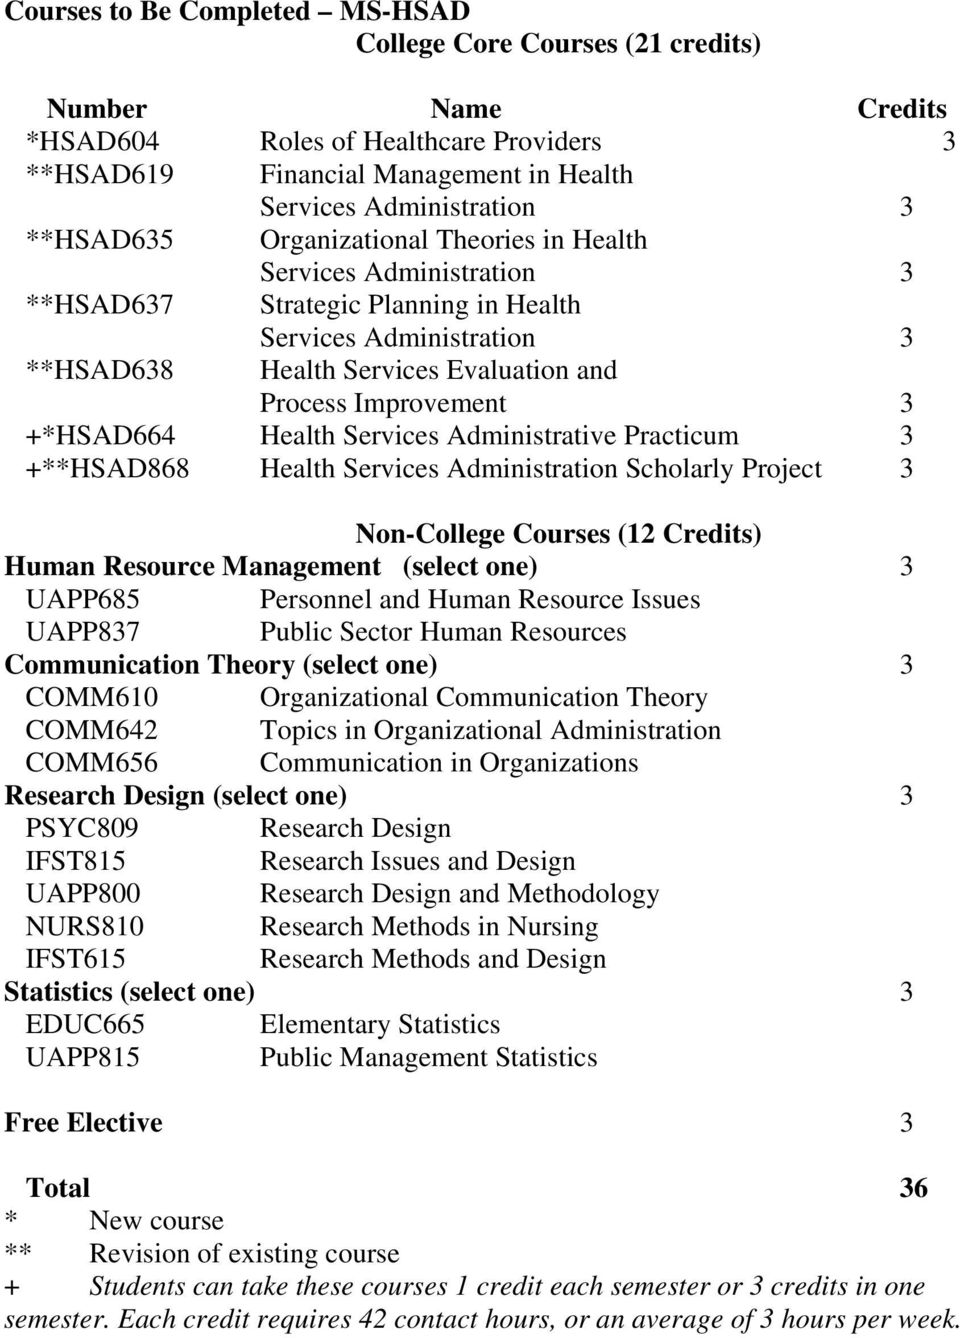 +*HSAD664 Health Services Administrative Practicum 3 +**HSAD868 Health Services Administration Scholarly Project 3 Non-College Courses (12 Credits) Human Resource Management (select one) 3 UAPP685